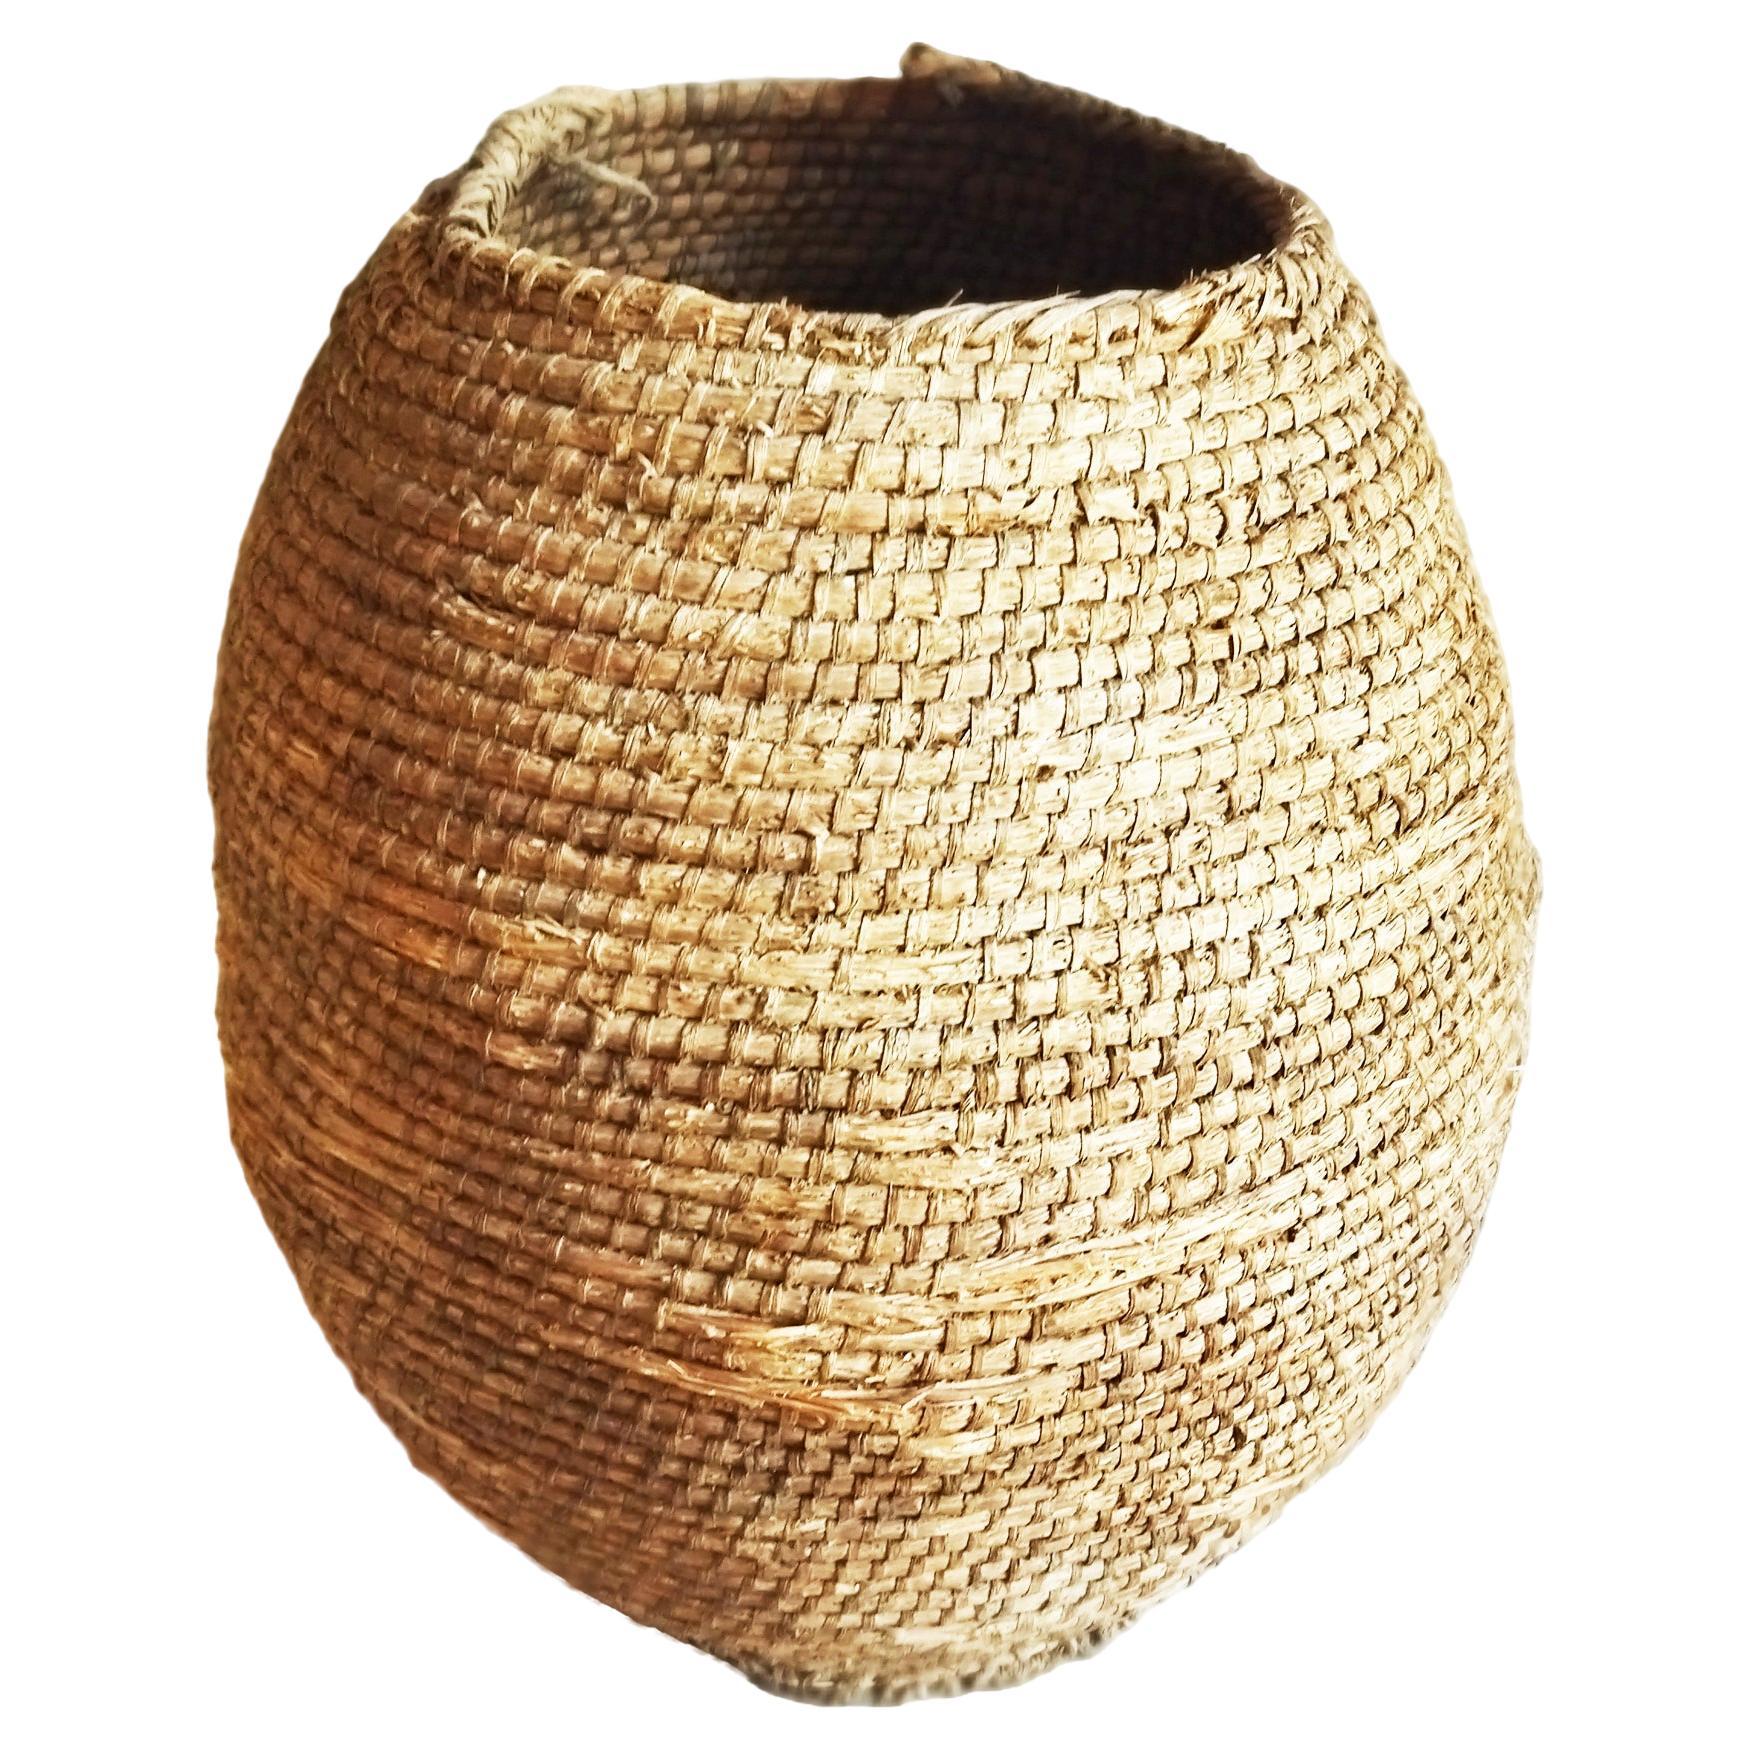 Large Wheat Basket Made With Esparto Grass or Hemp, Garden Ornaments Pot Cover For Sale